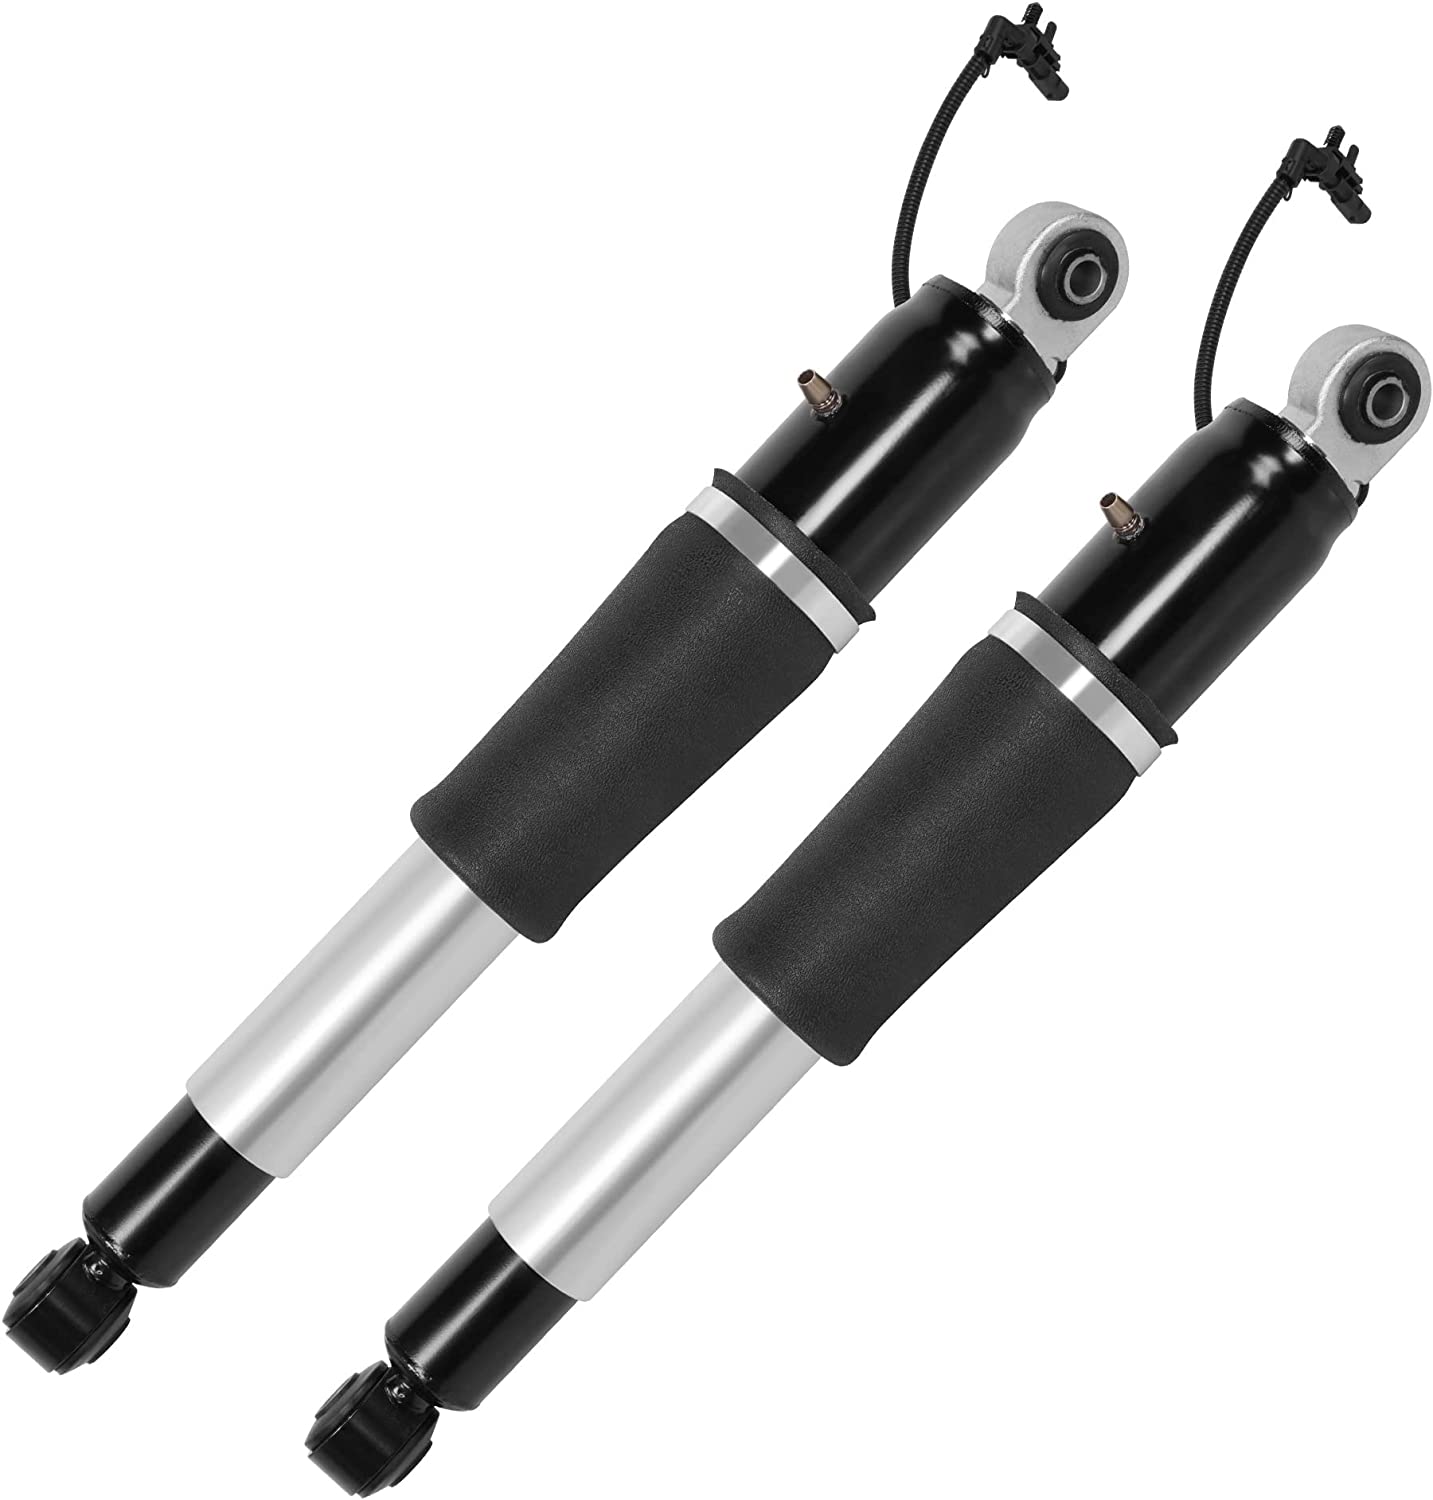 Set of 2 Rear Air Suspension Shock Absorber Struts Replacement